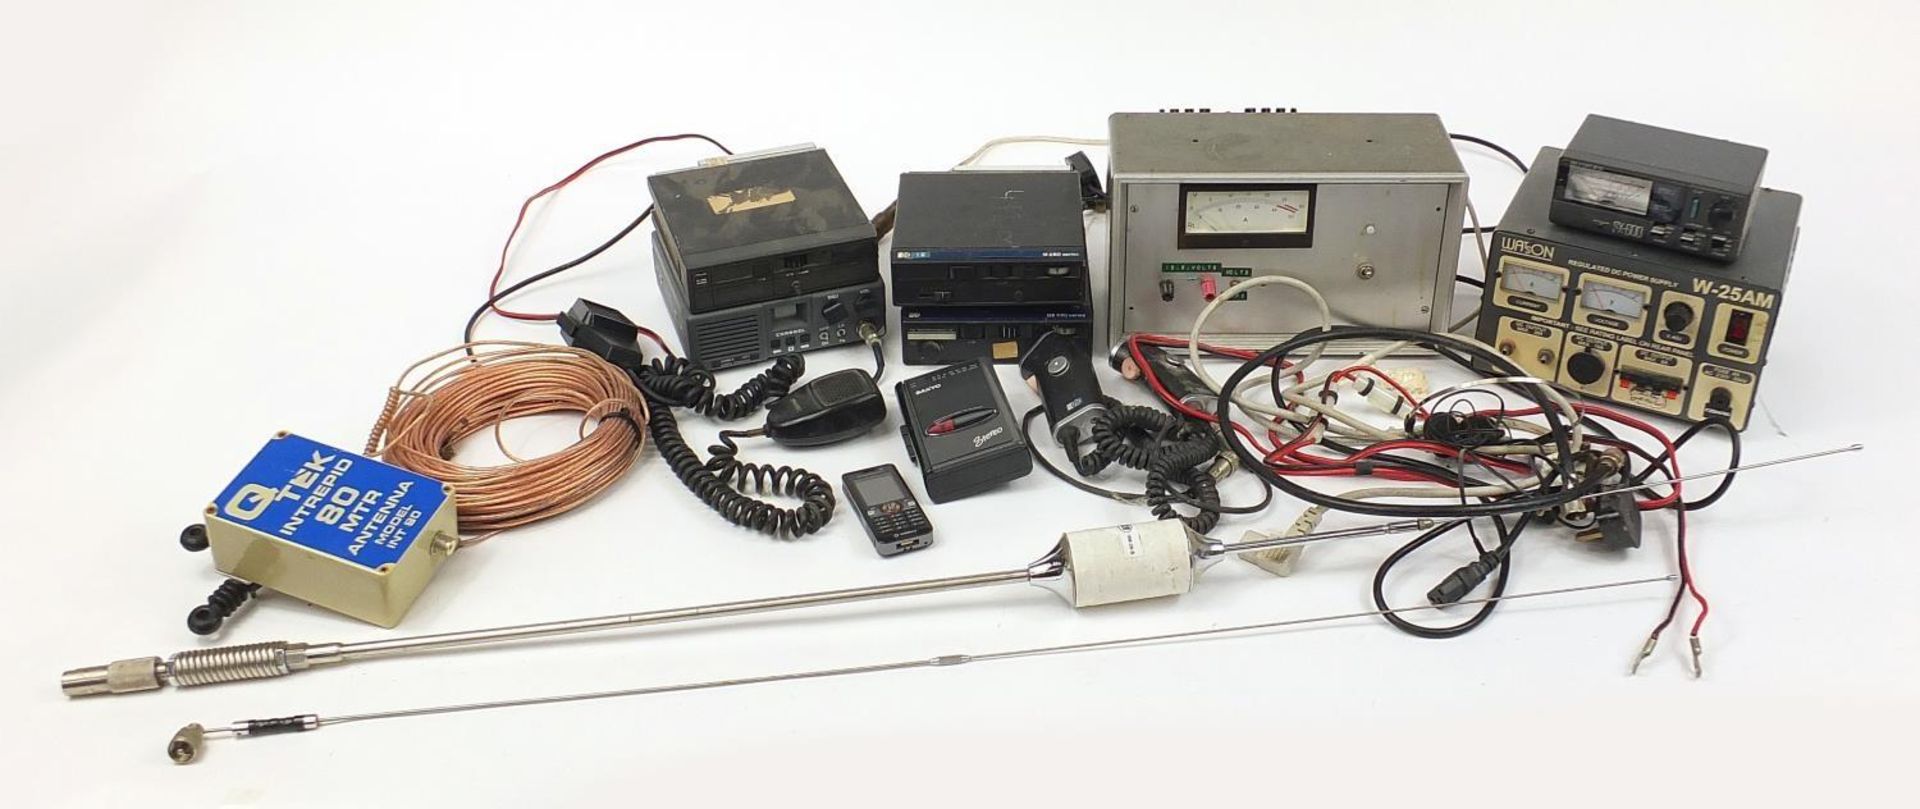 Vintage radio and other audio equipment including Pye M290 series, Garex 4001 transceiver and Jermyn